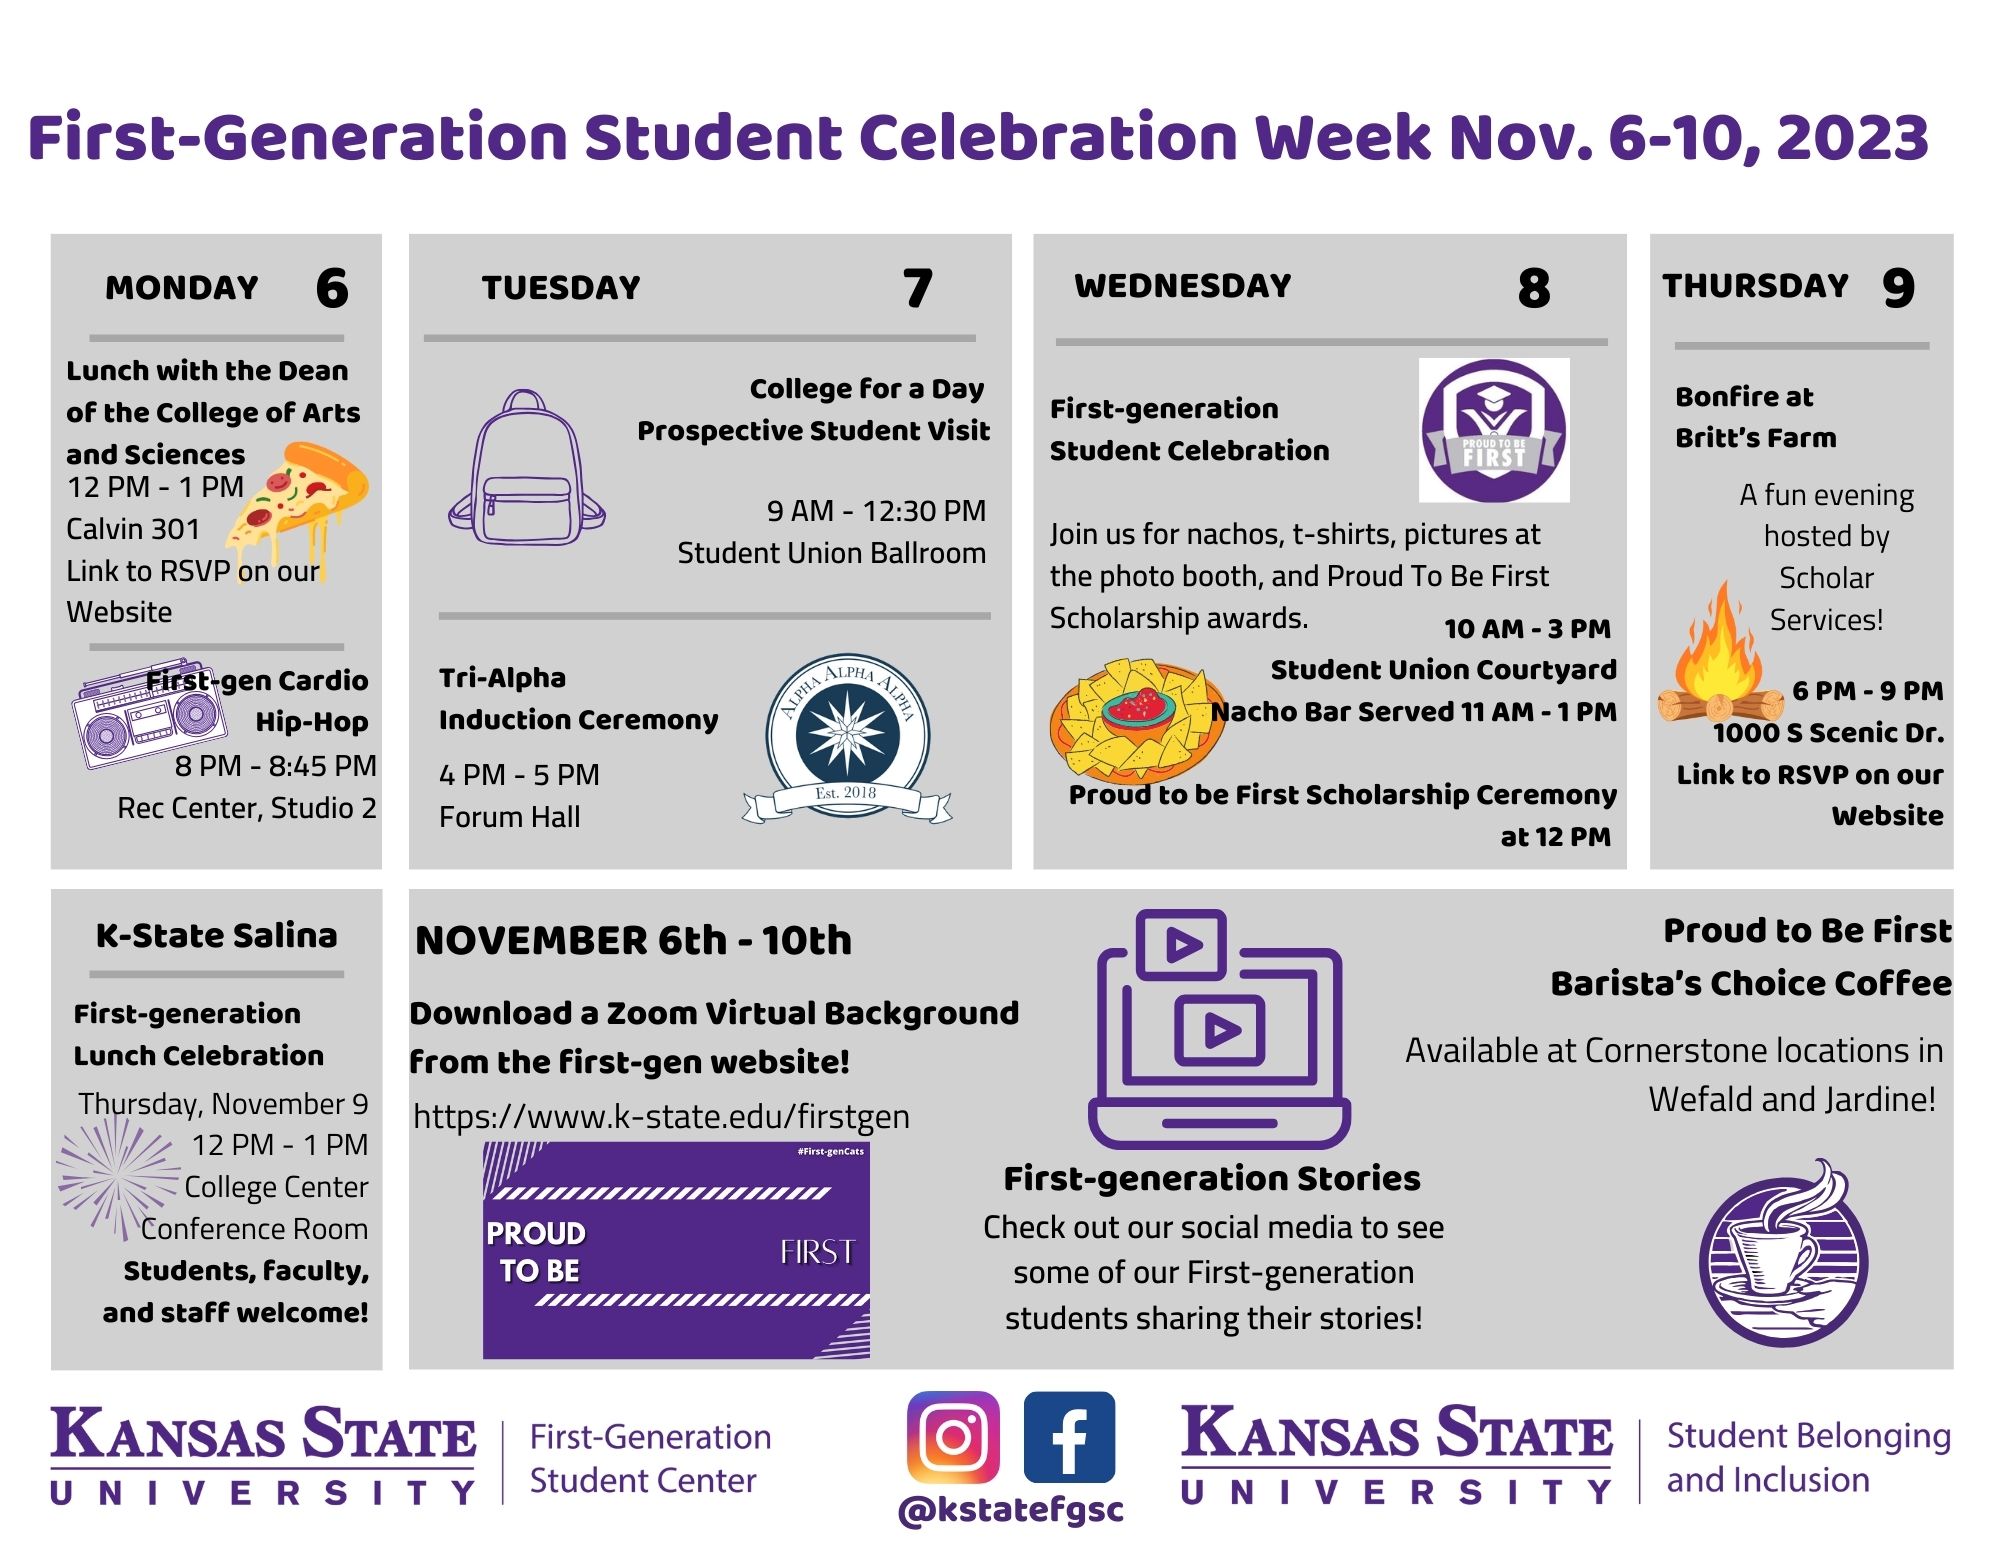 Calendar of events for the First-generation Student Celebration Week